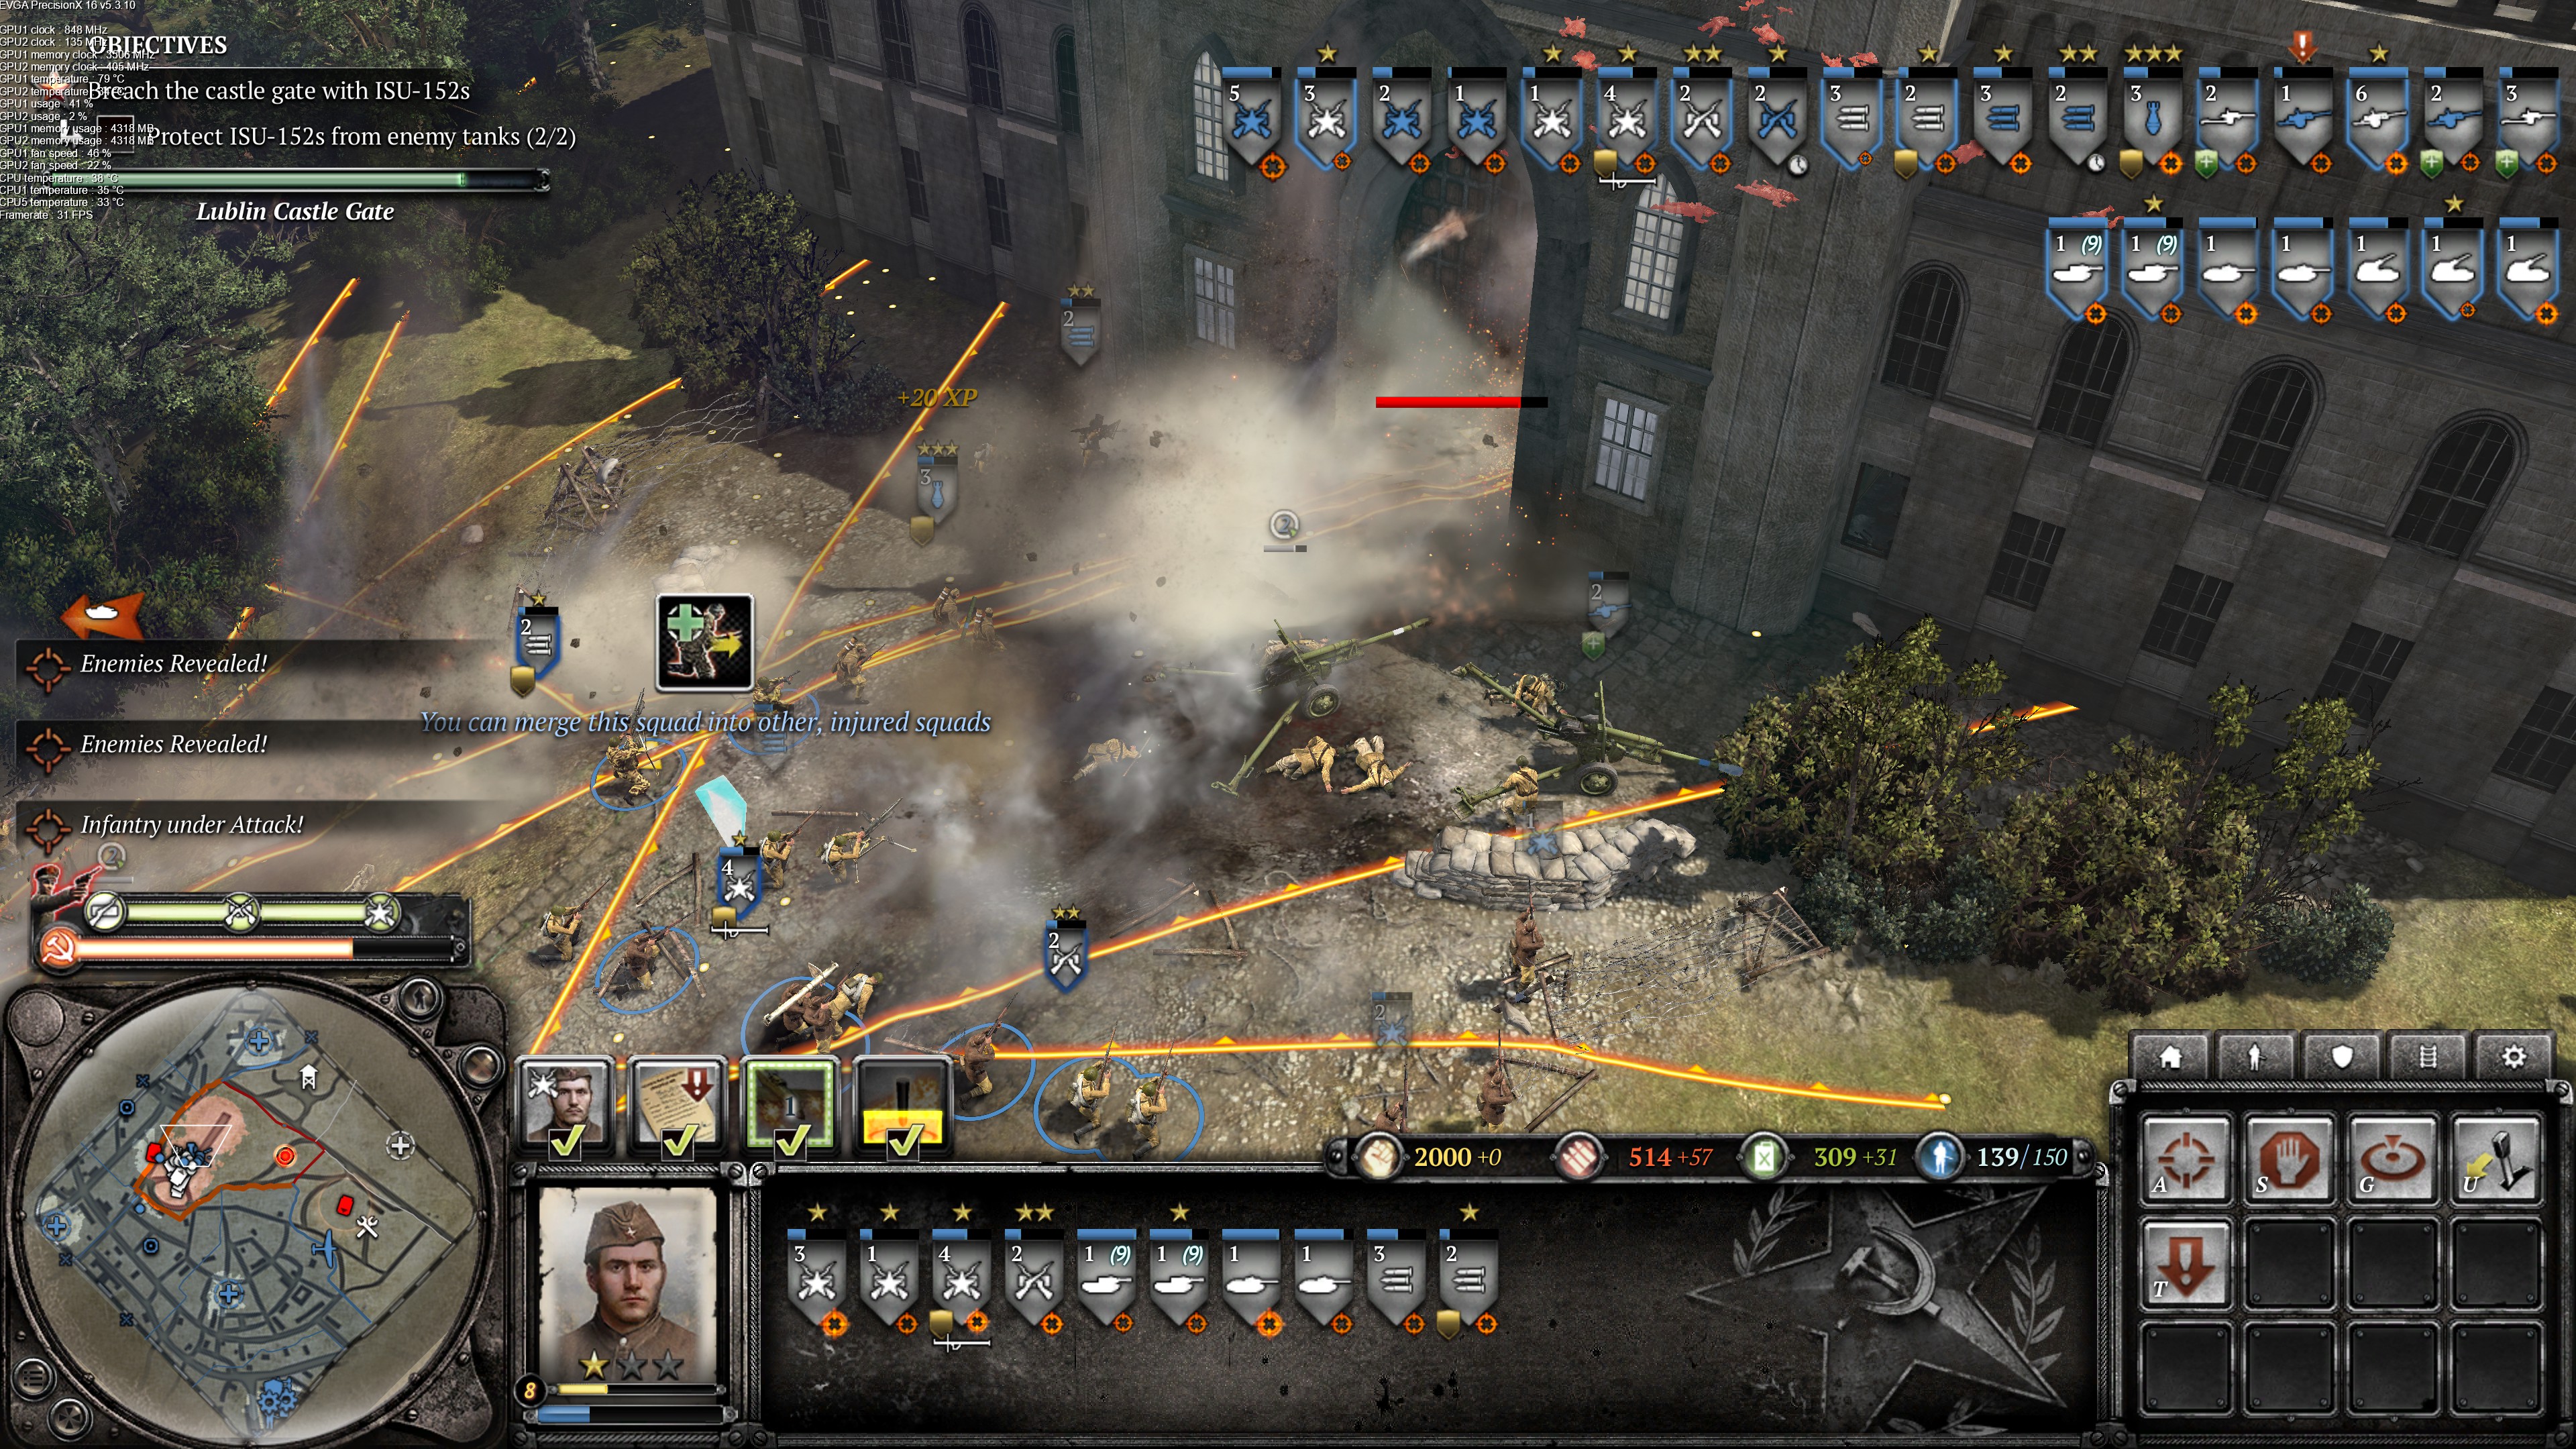 steam company of heroes 2 free